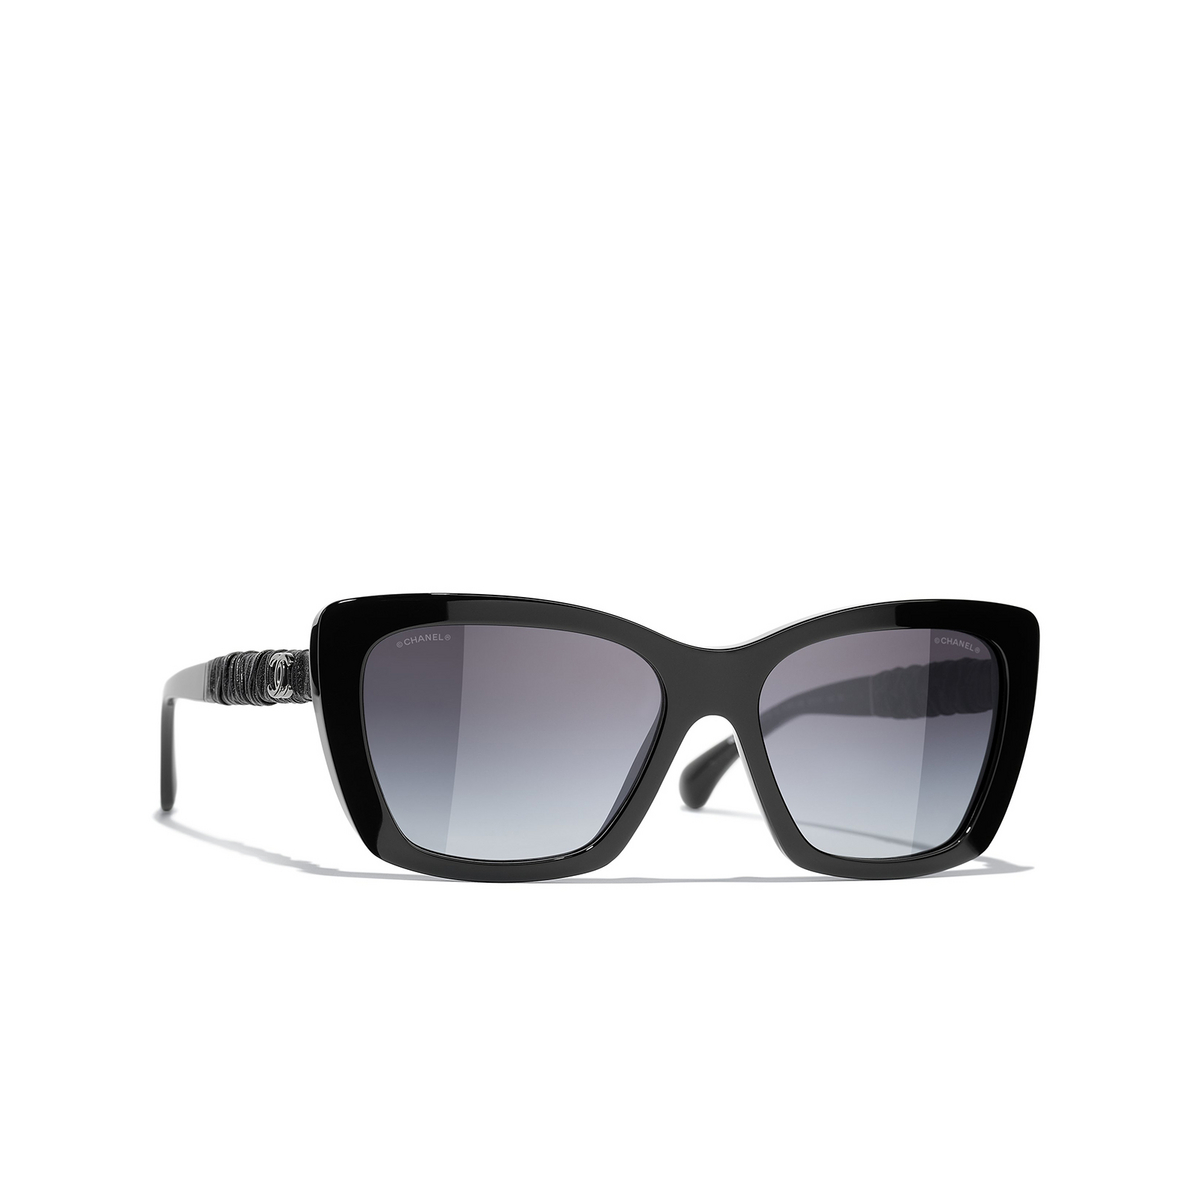 CHANEL butterfly Sunglasses C501S6 Black & White - three-quarters view